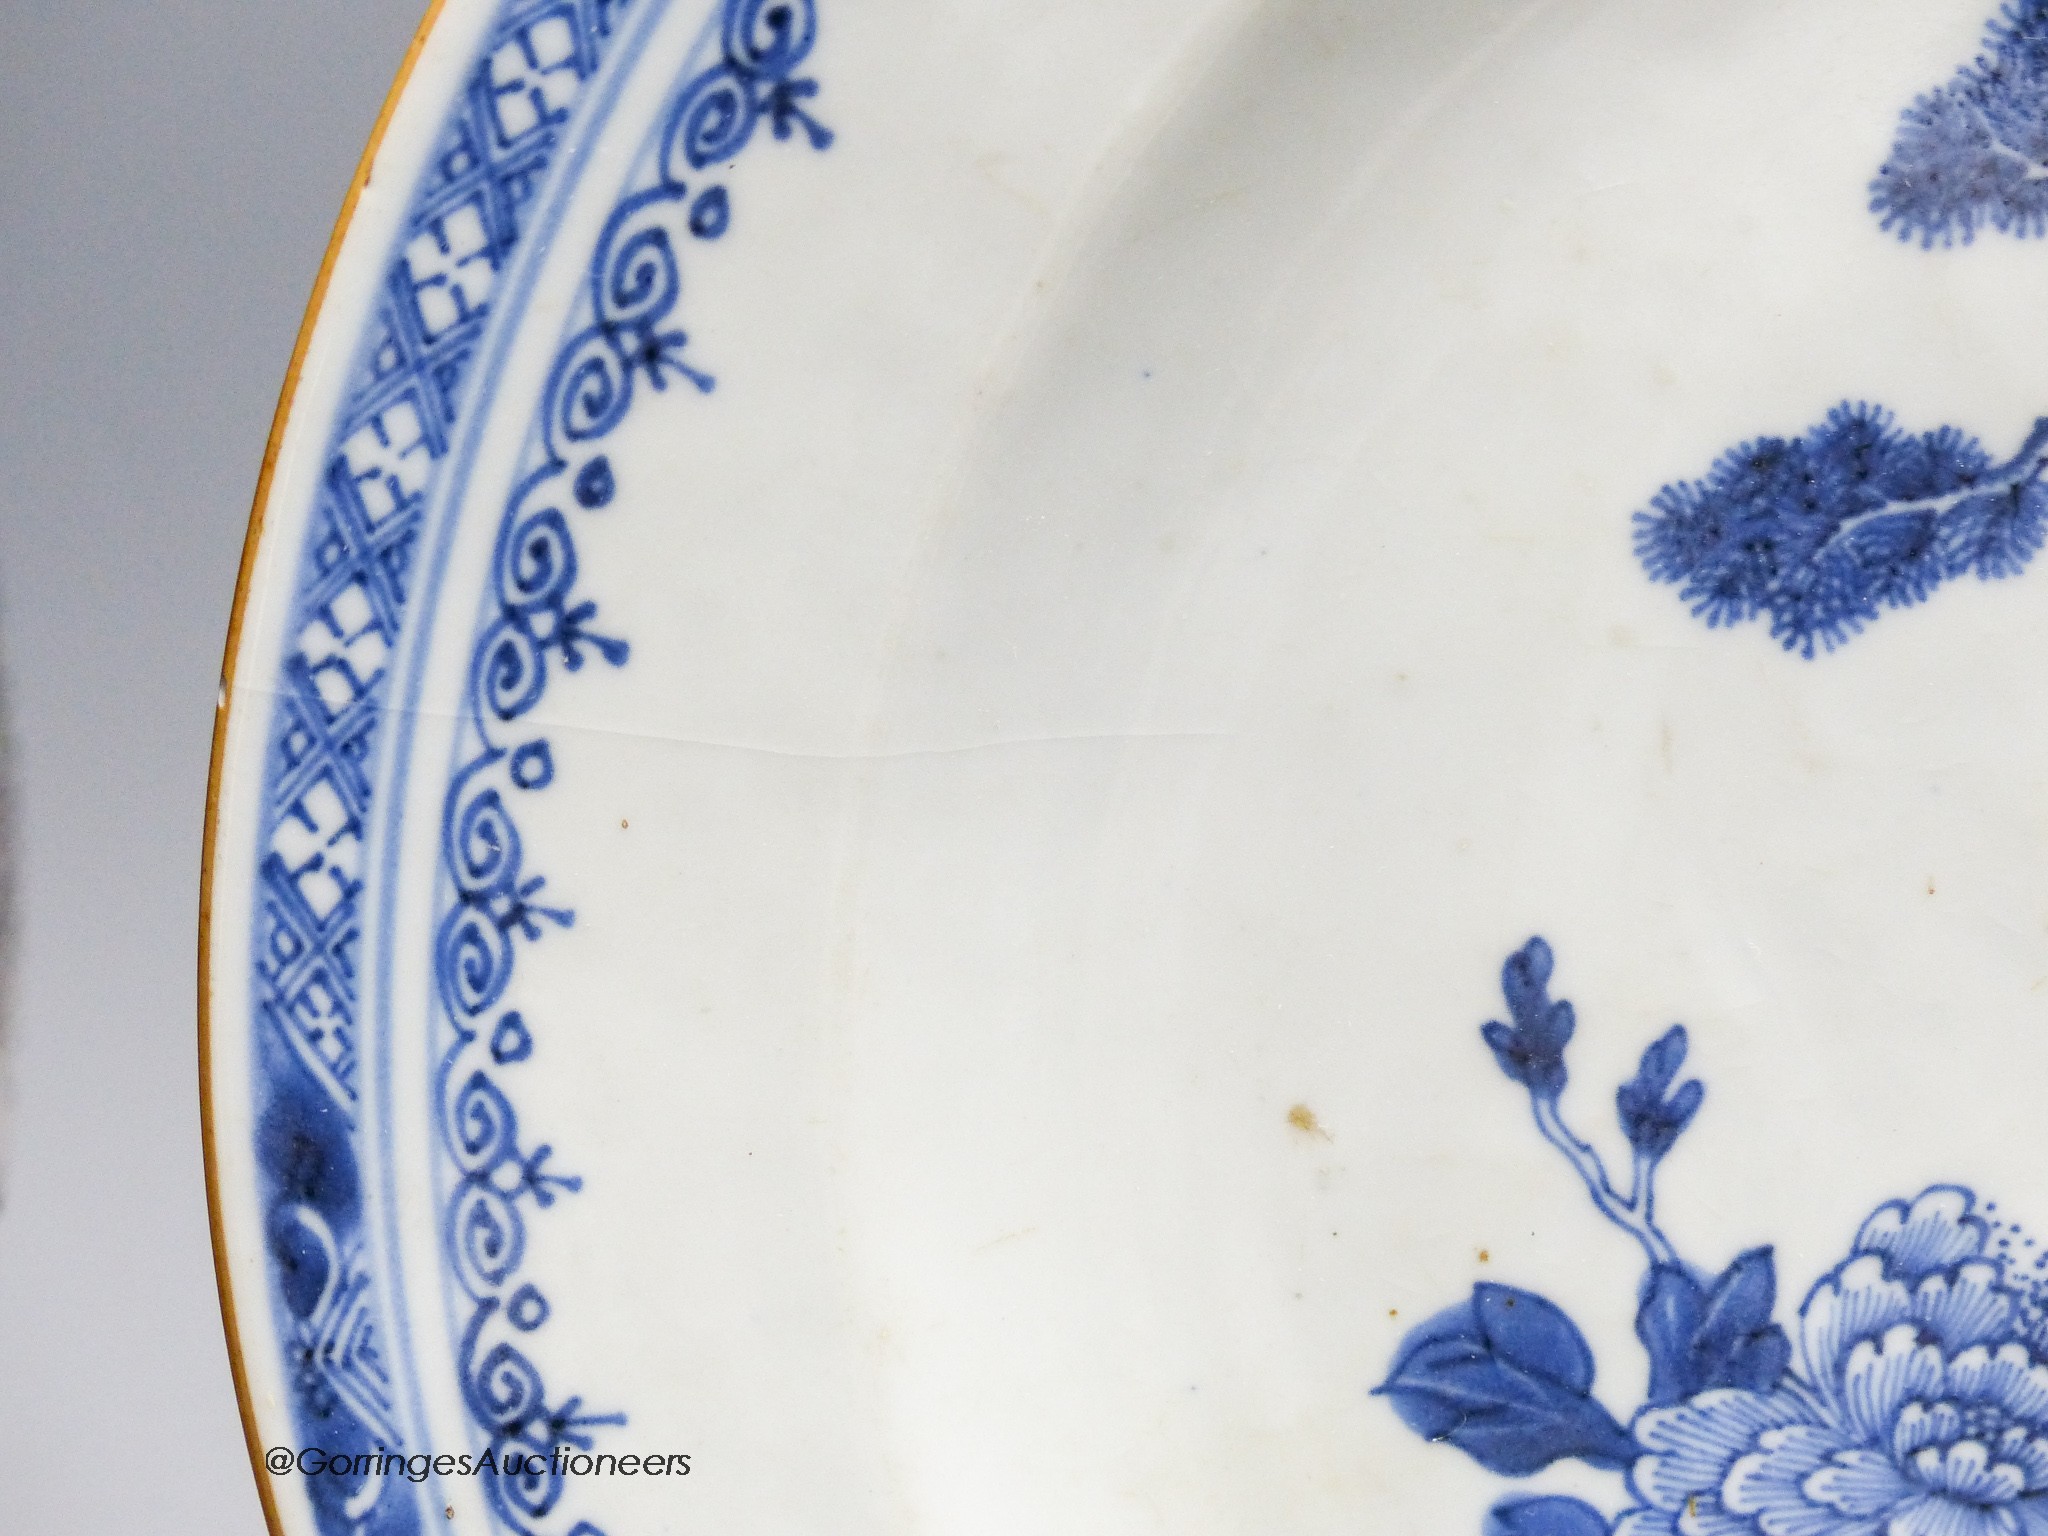 An 18th century Chinese blue and white export plate, diameter 31cm